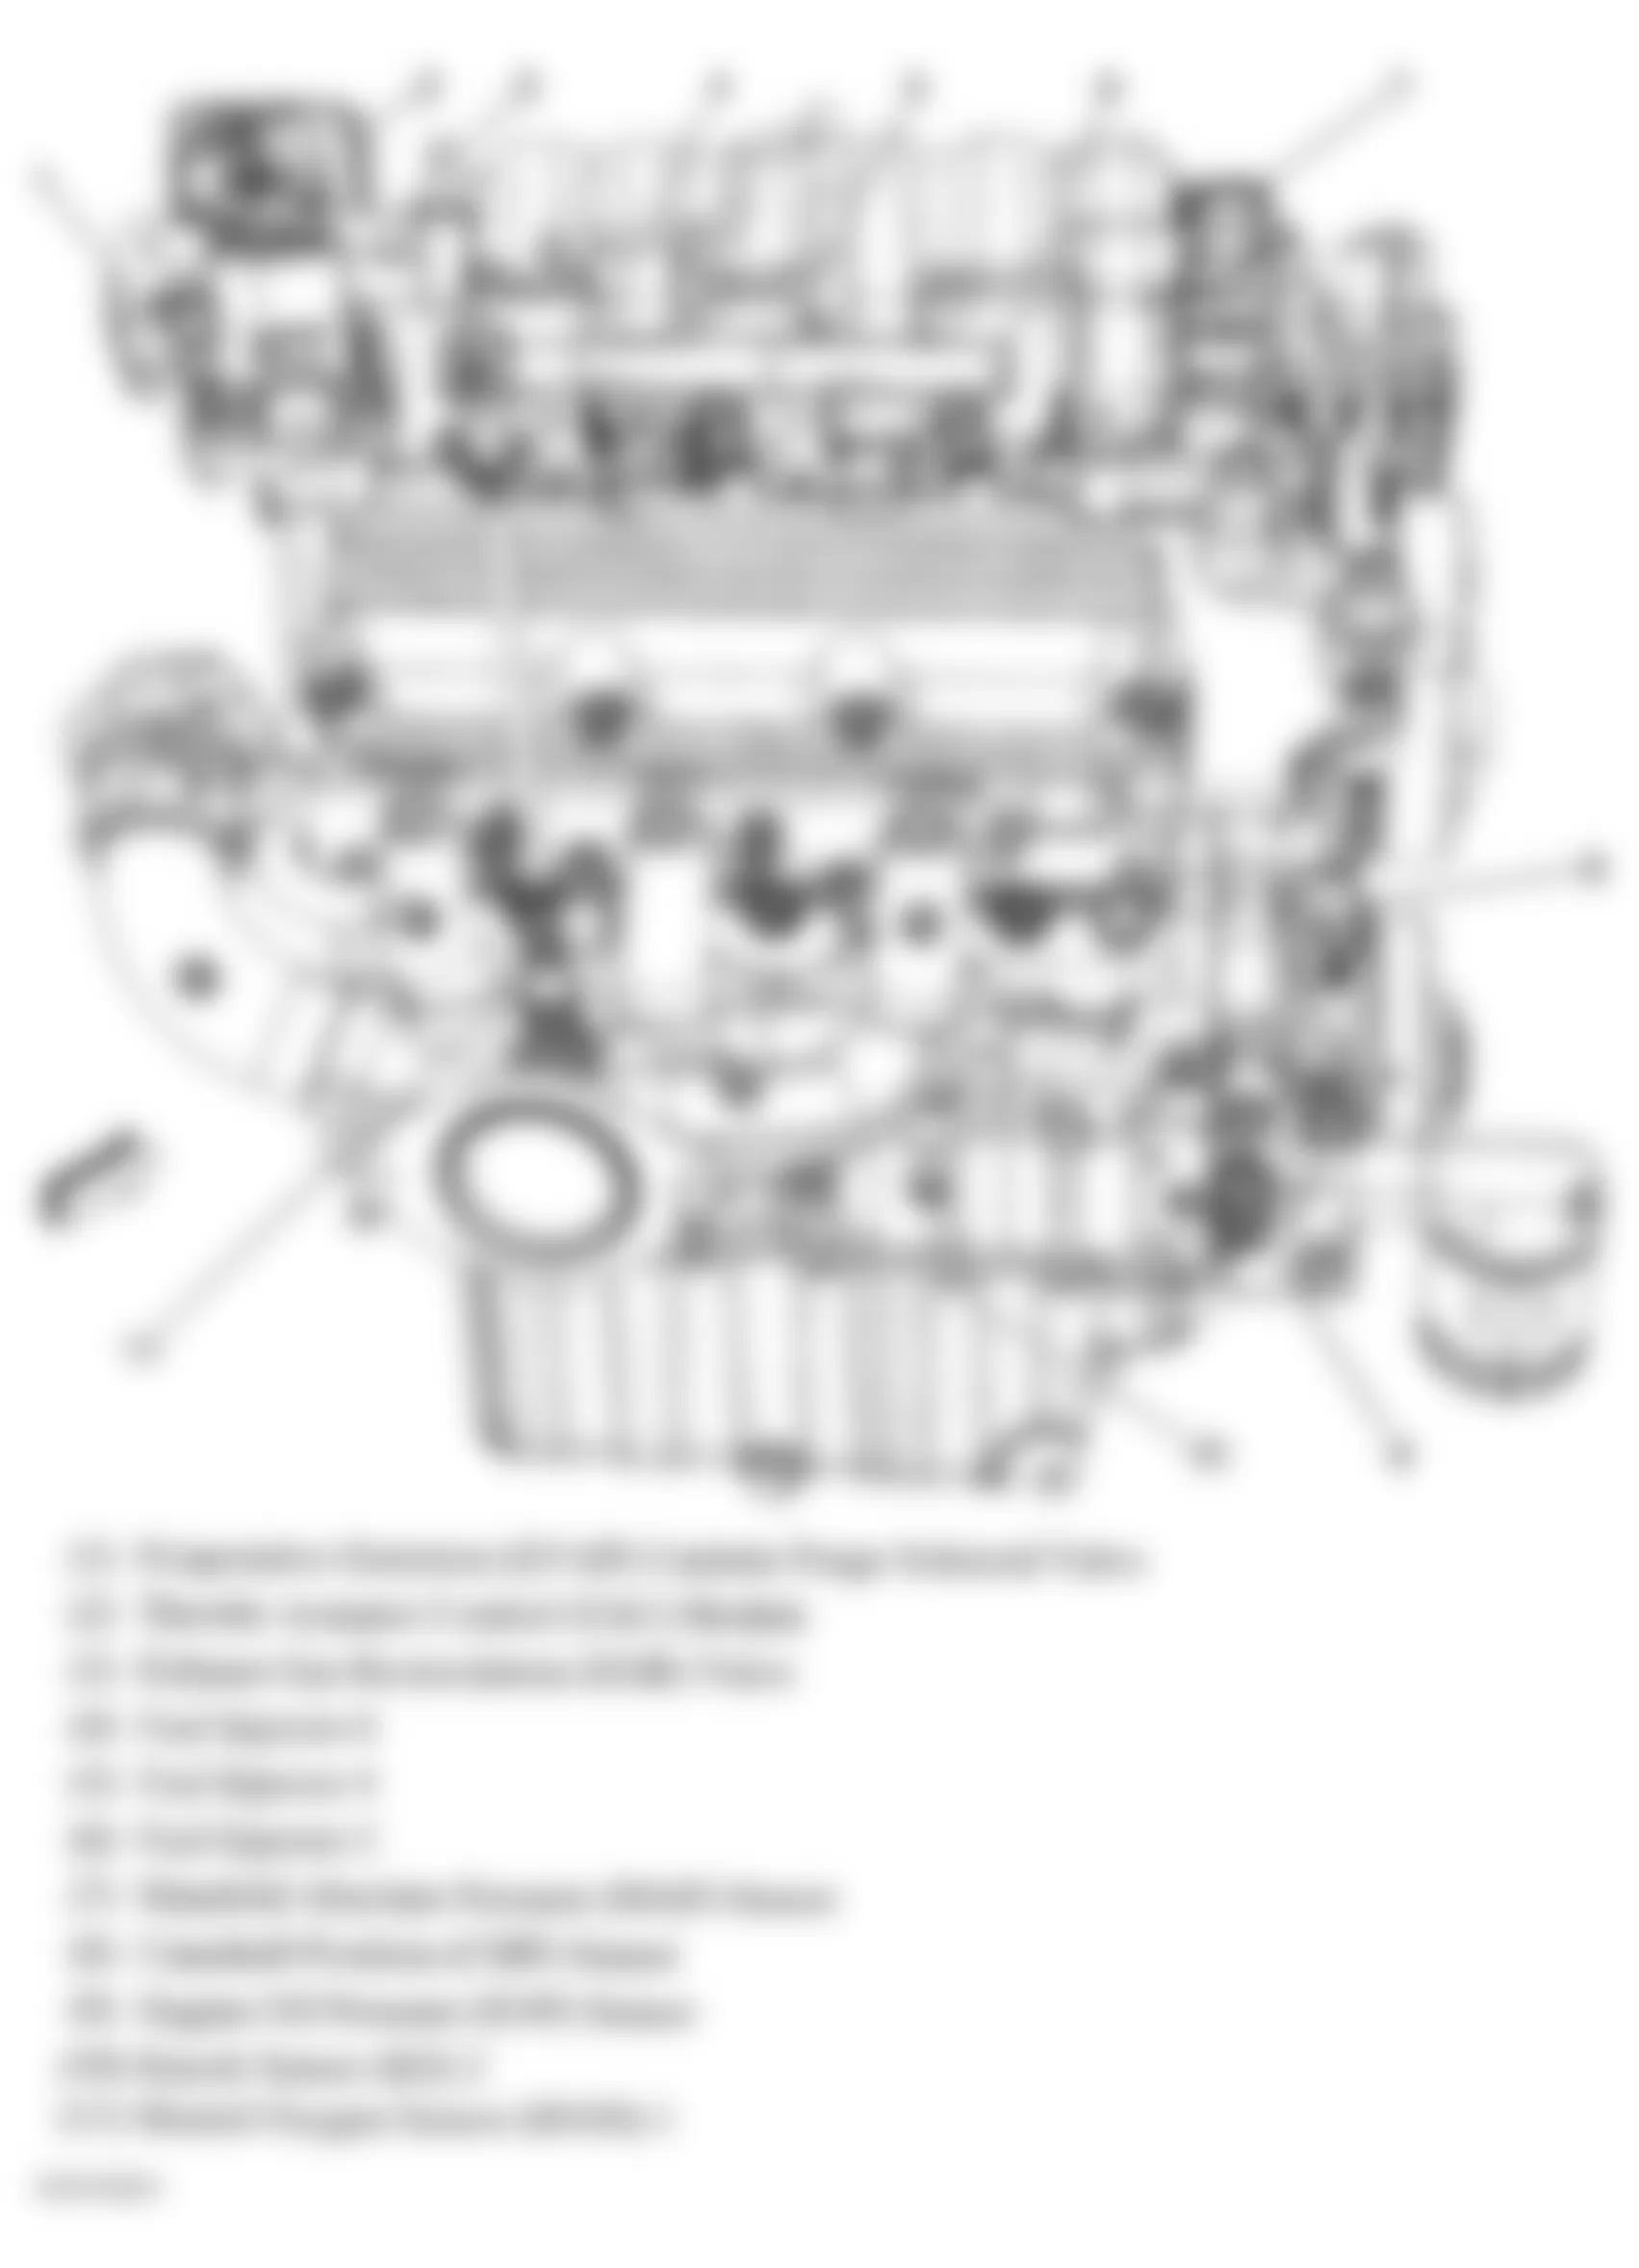 Buick Lucerne CXS 2007 - Component Locations -  Right Side Of Engine (3.8L)